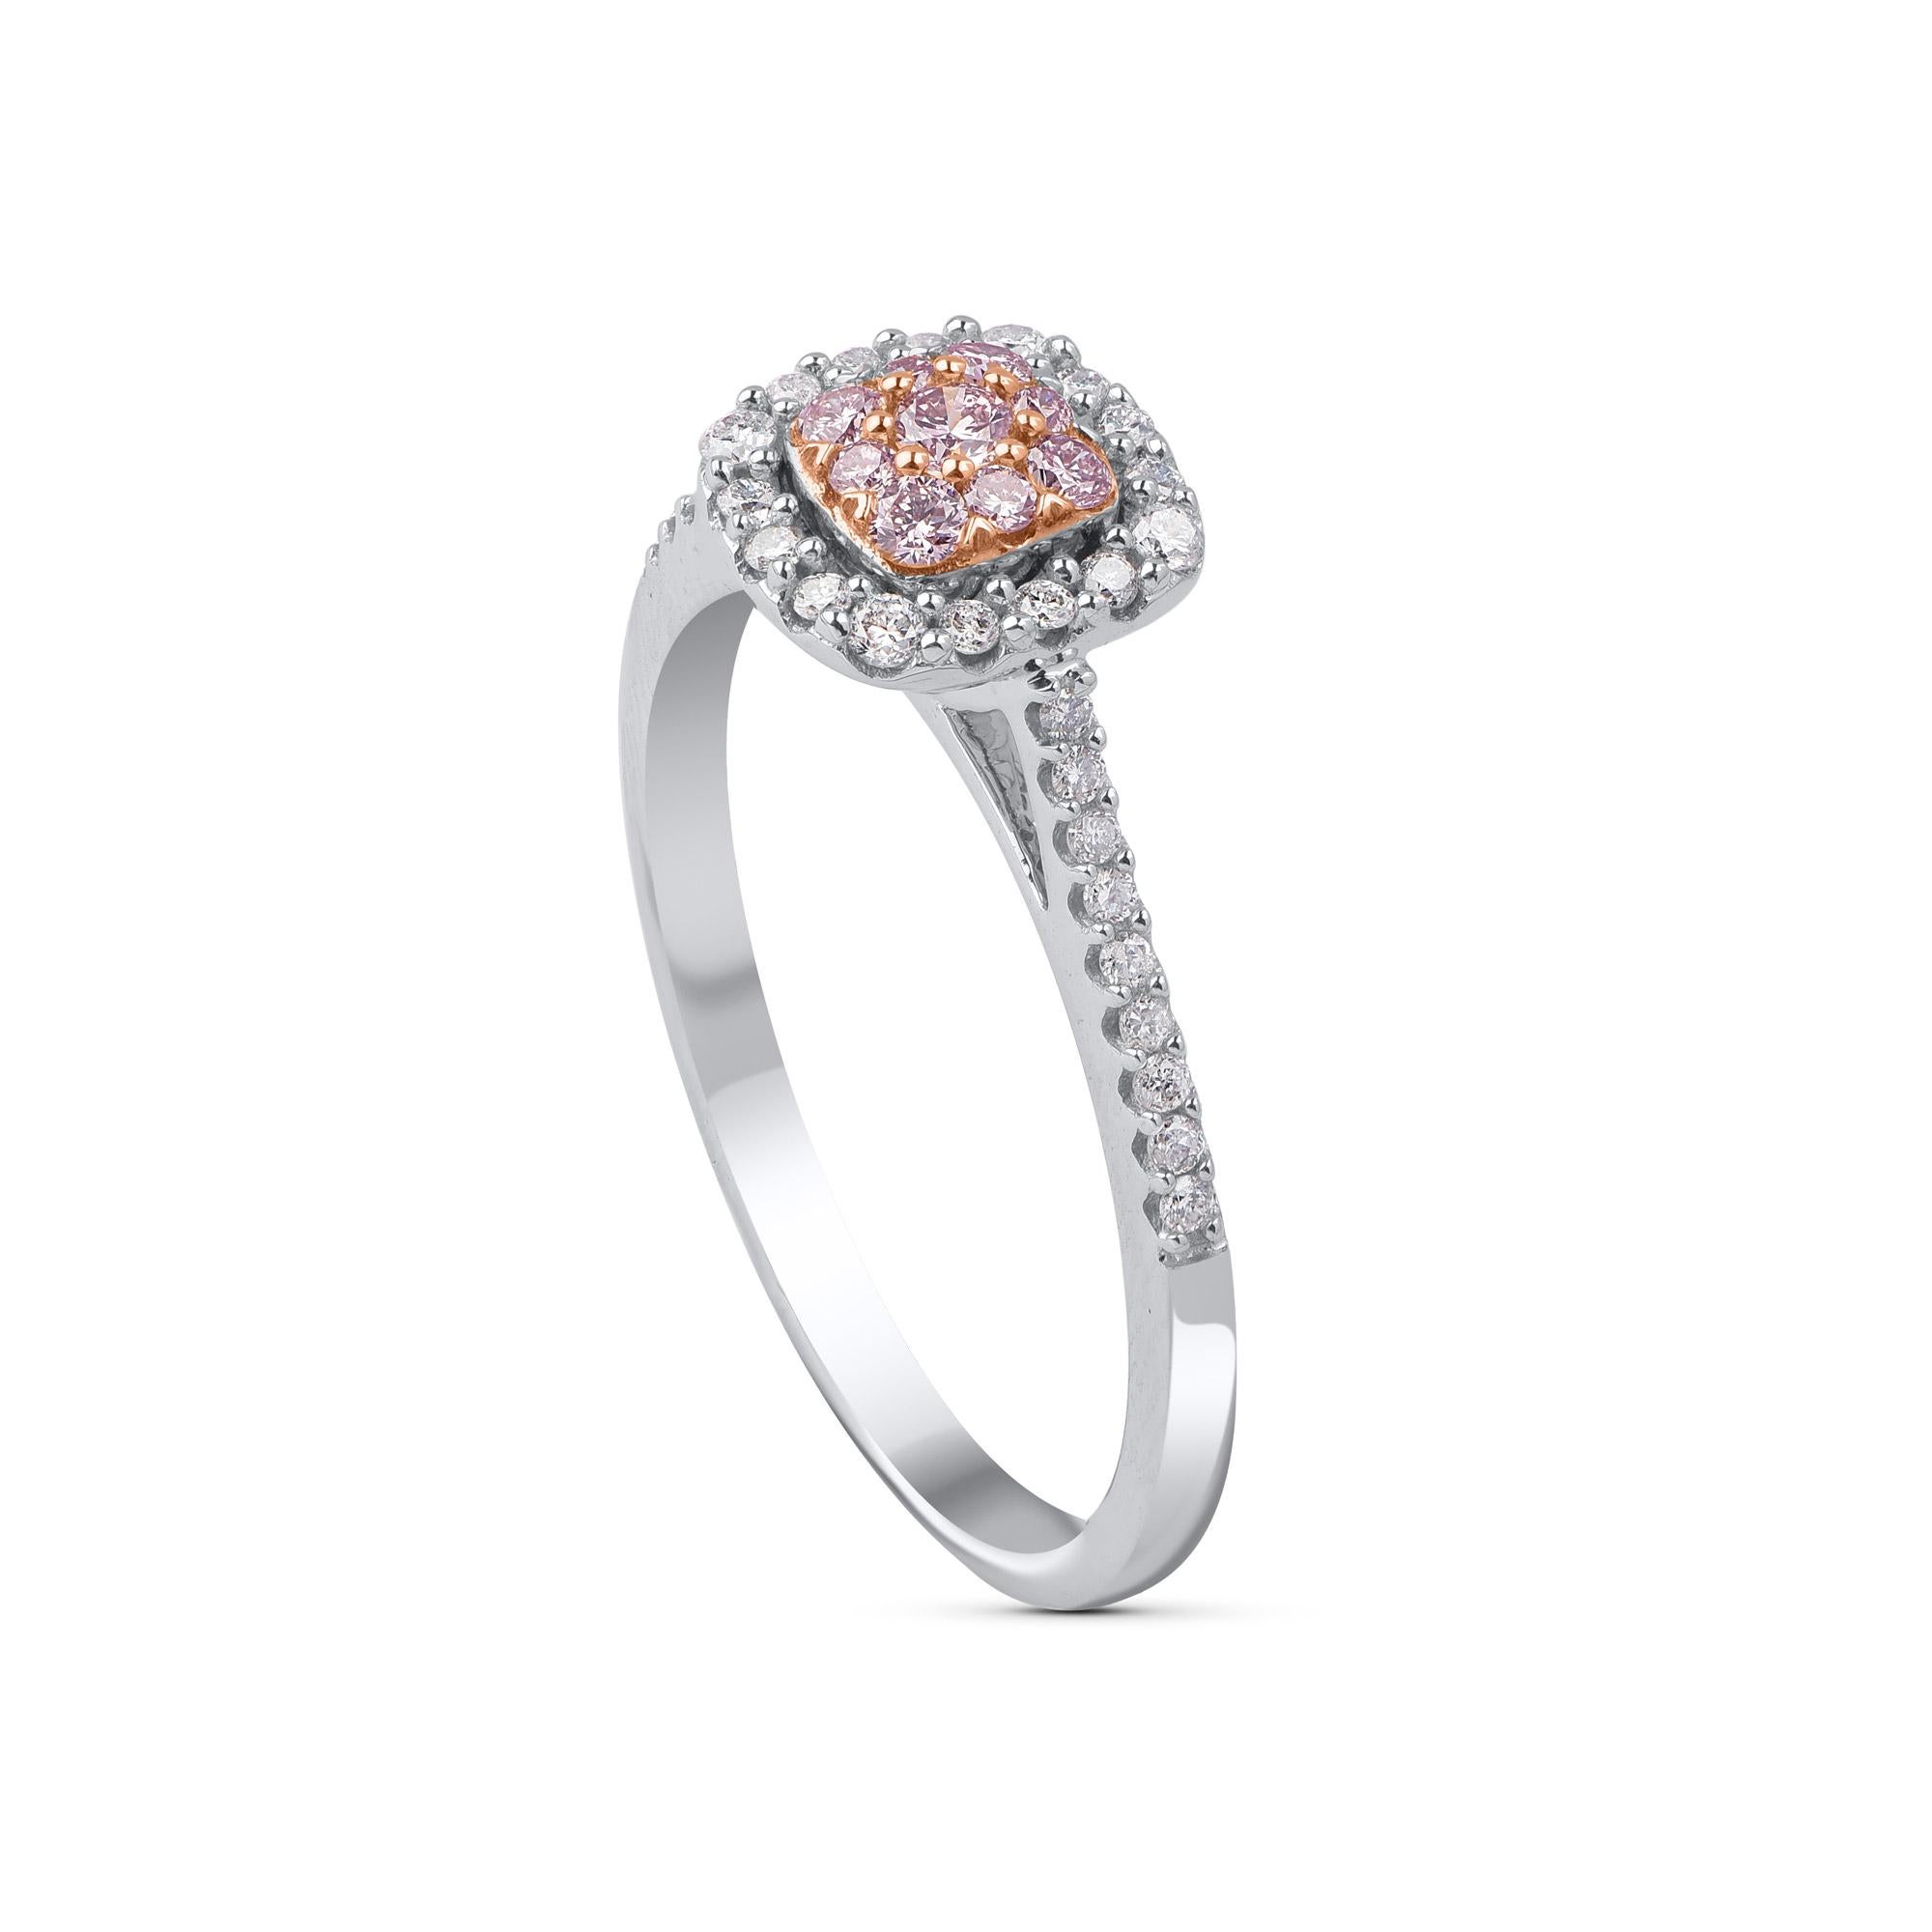 Add a touch of elegance with this diamond engagement ring. This designer ring is expertly hand-crafted in 18 kt white and rose gold and shimmering with 34 white and 9 natural pink rosé round-cut diamonds elegantly set in prong setting, H-I Color, I2